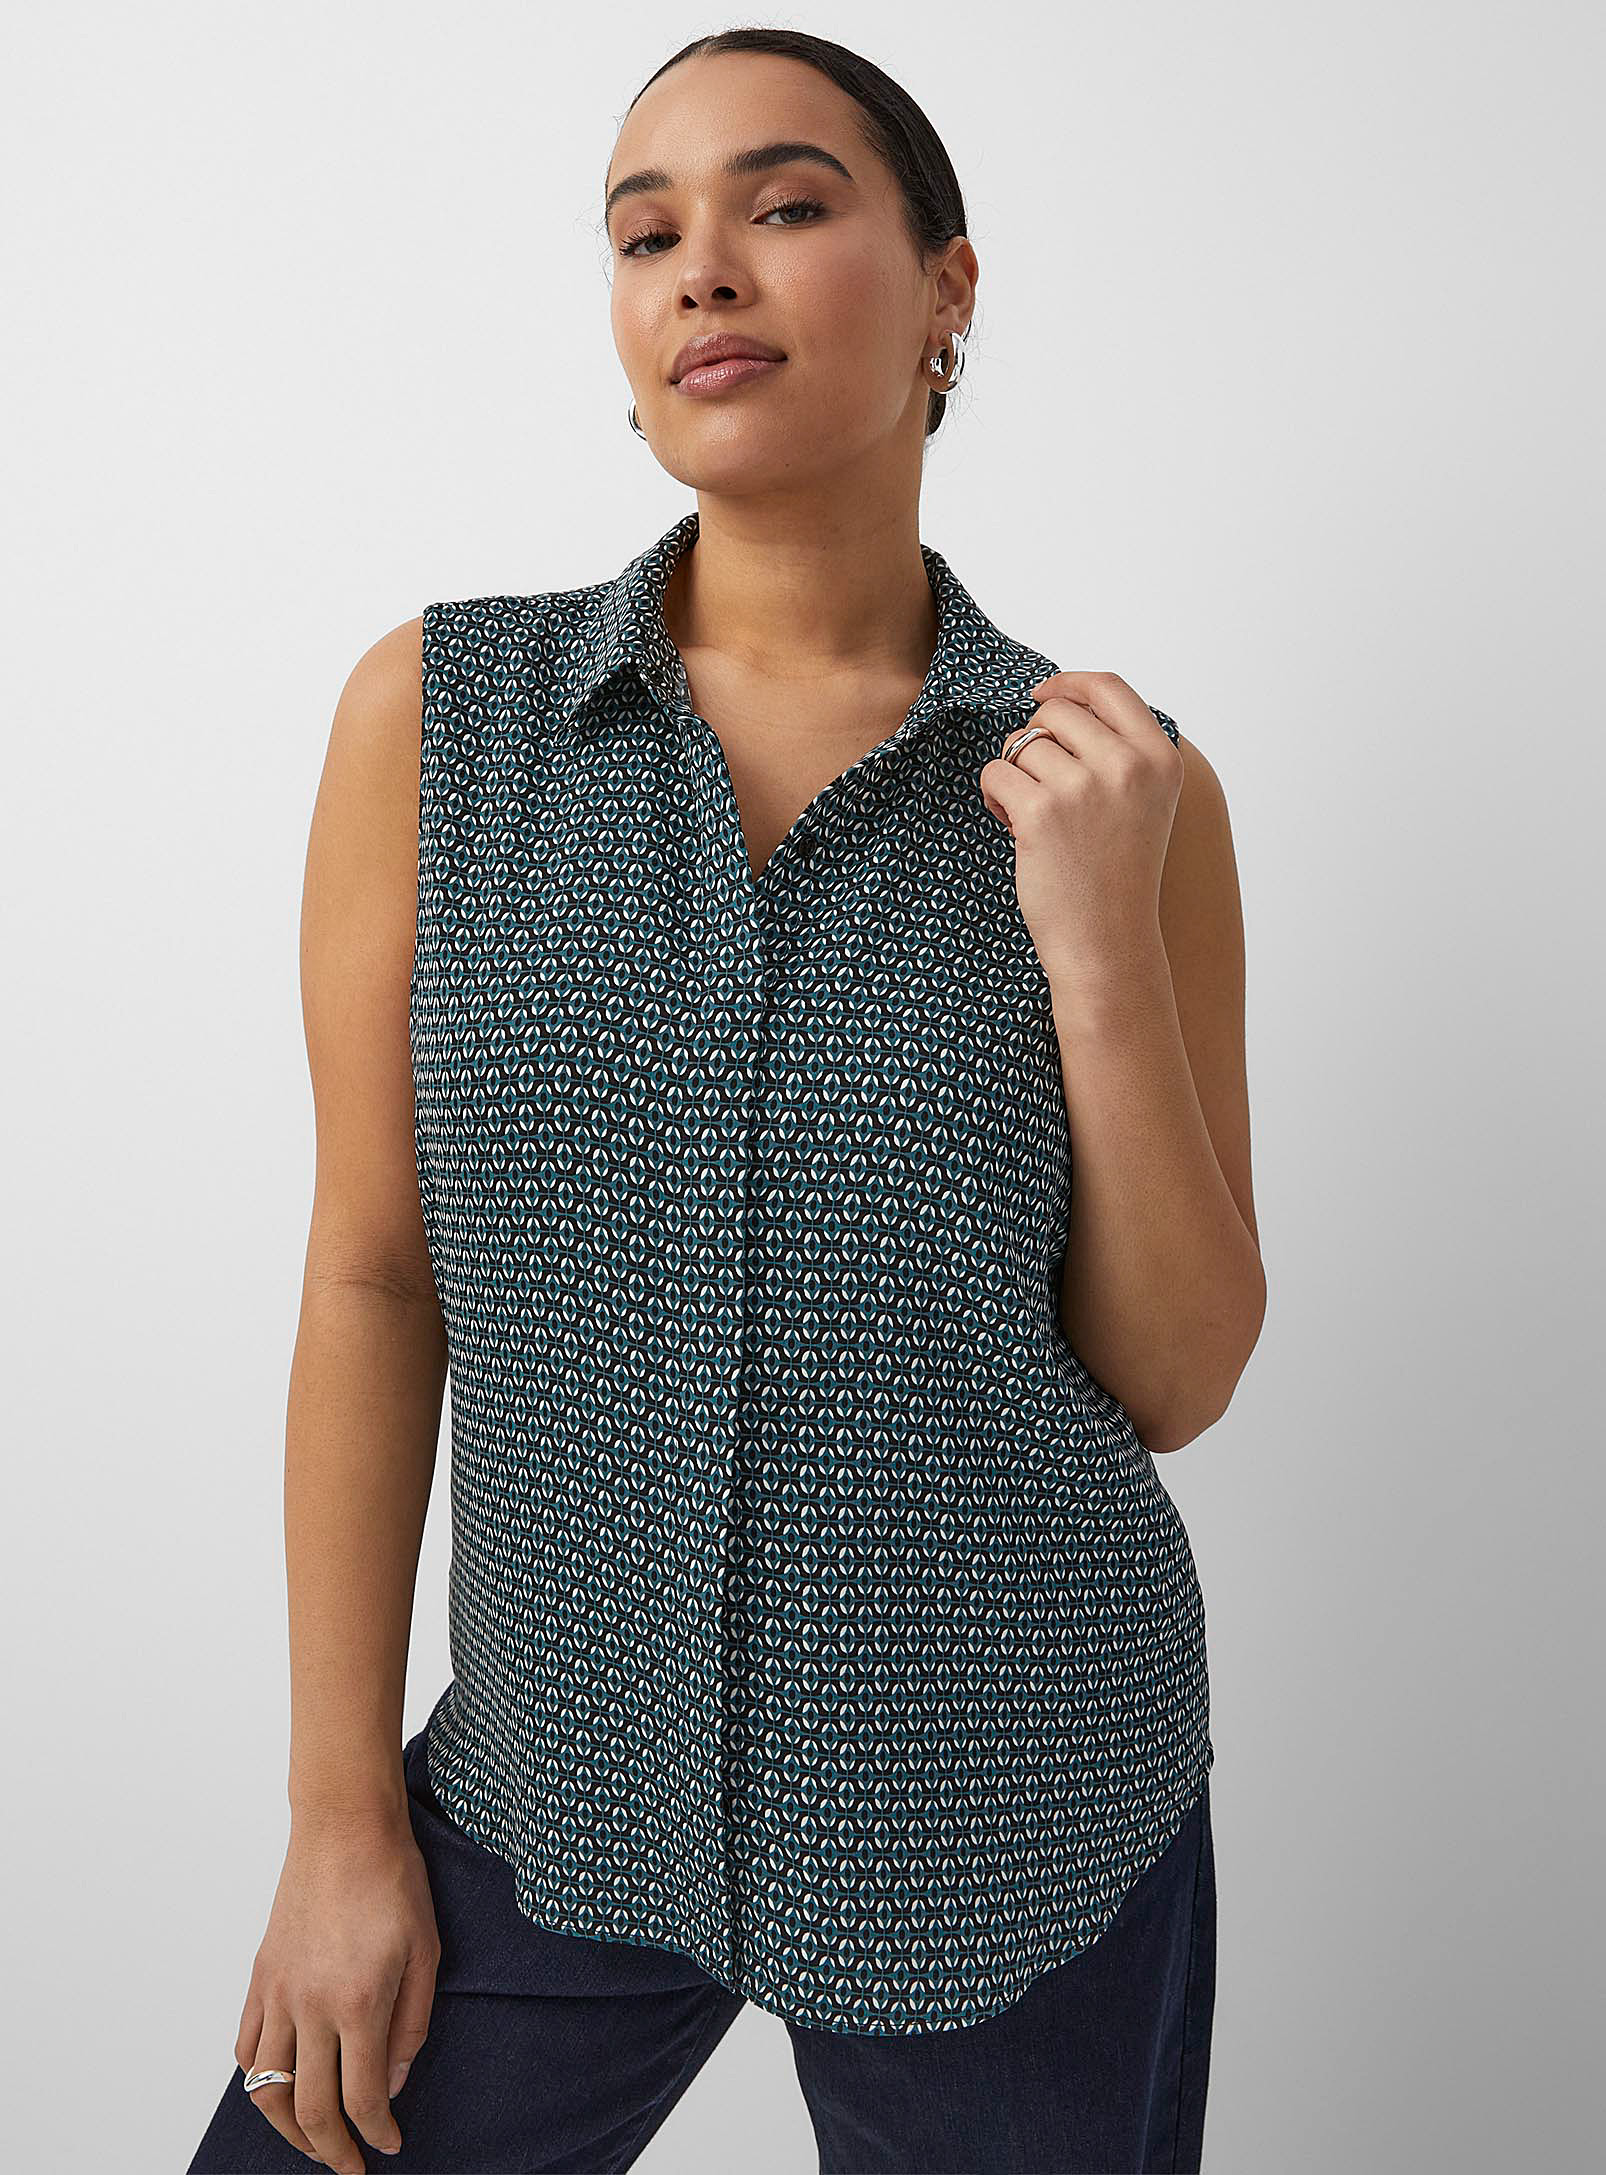 Contemporaine Sleeveless Printed Shirt In Patterned Green